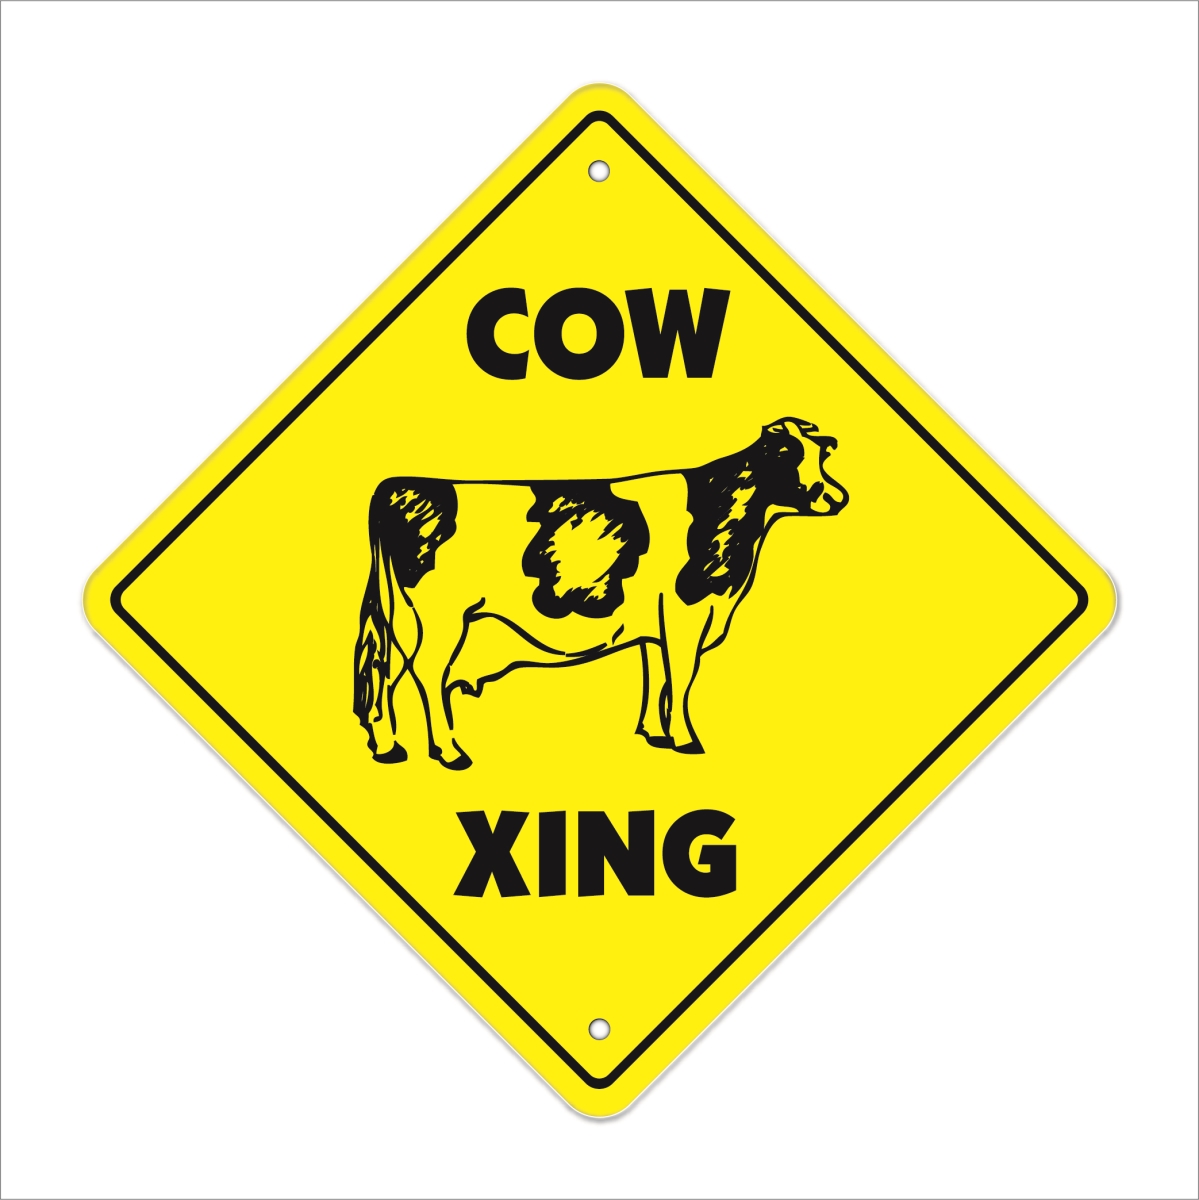 Amistad 12 x 12 in. Zone Xing Crossing Sign - Cow